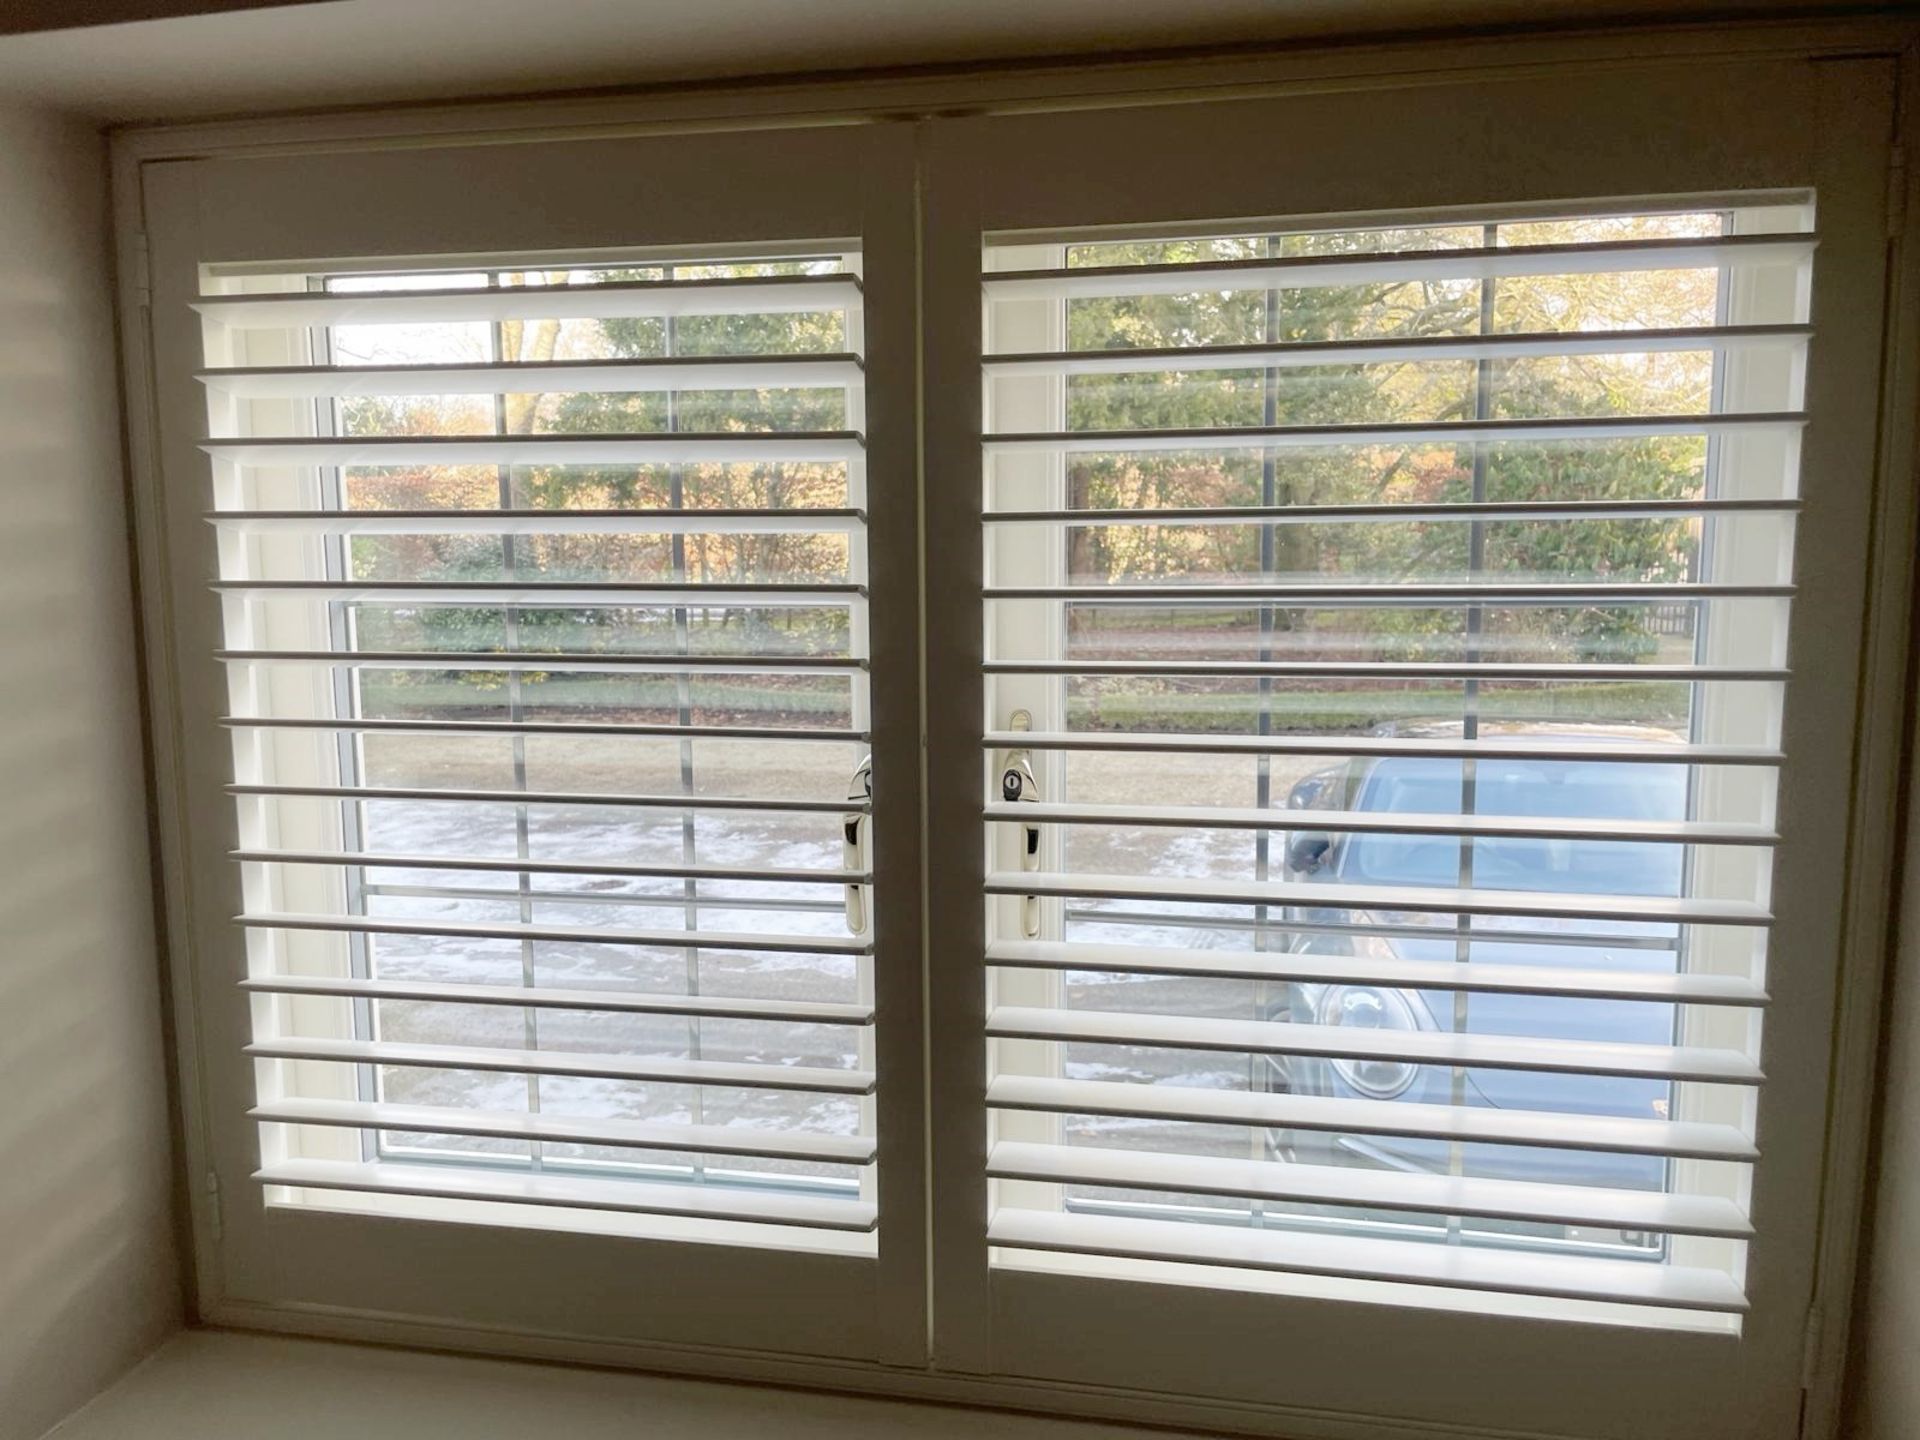 1 x Hardwood Timber Double Glazed Leaded 2-Pane Window Frame fitted with Shutter Blinds - Image 7 of 12